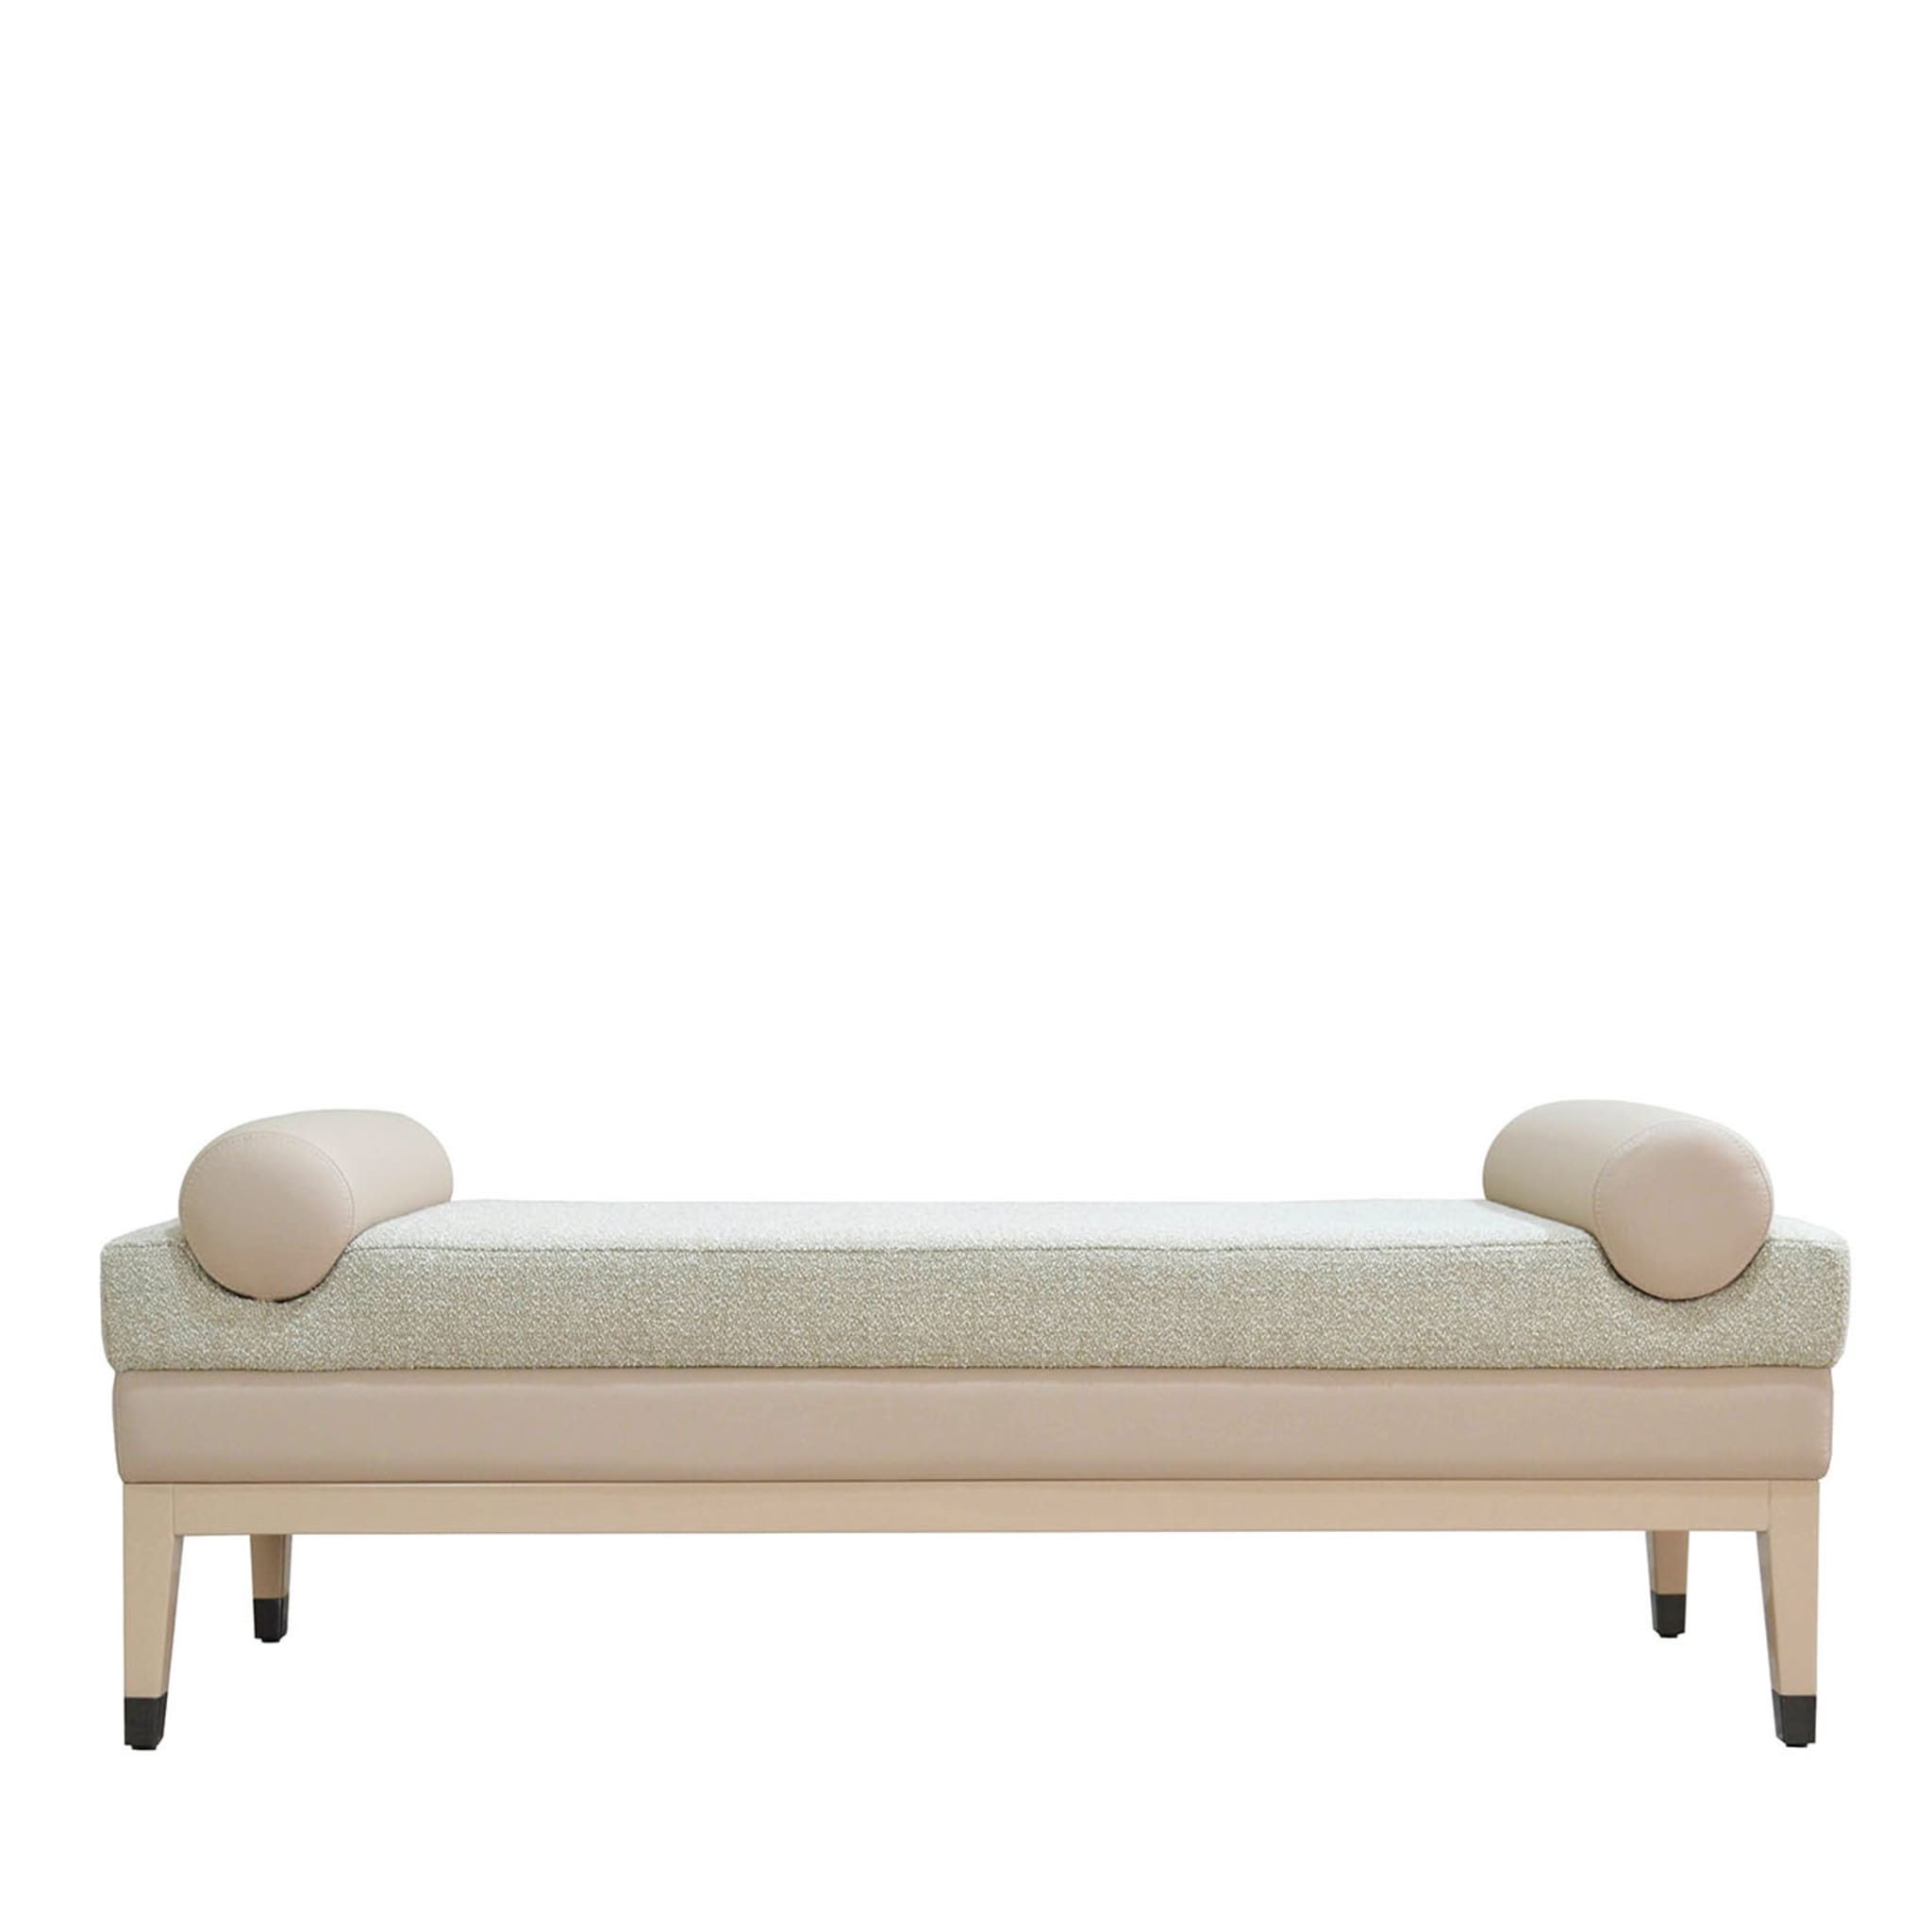 Italian Contemporary Upholstered Bench In Quinoa Fabric - Main view